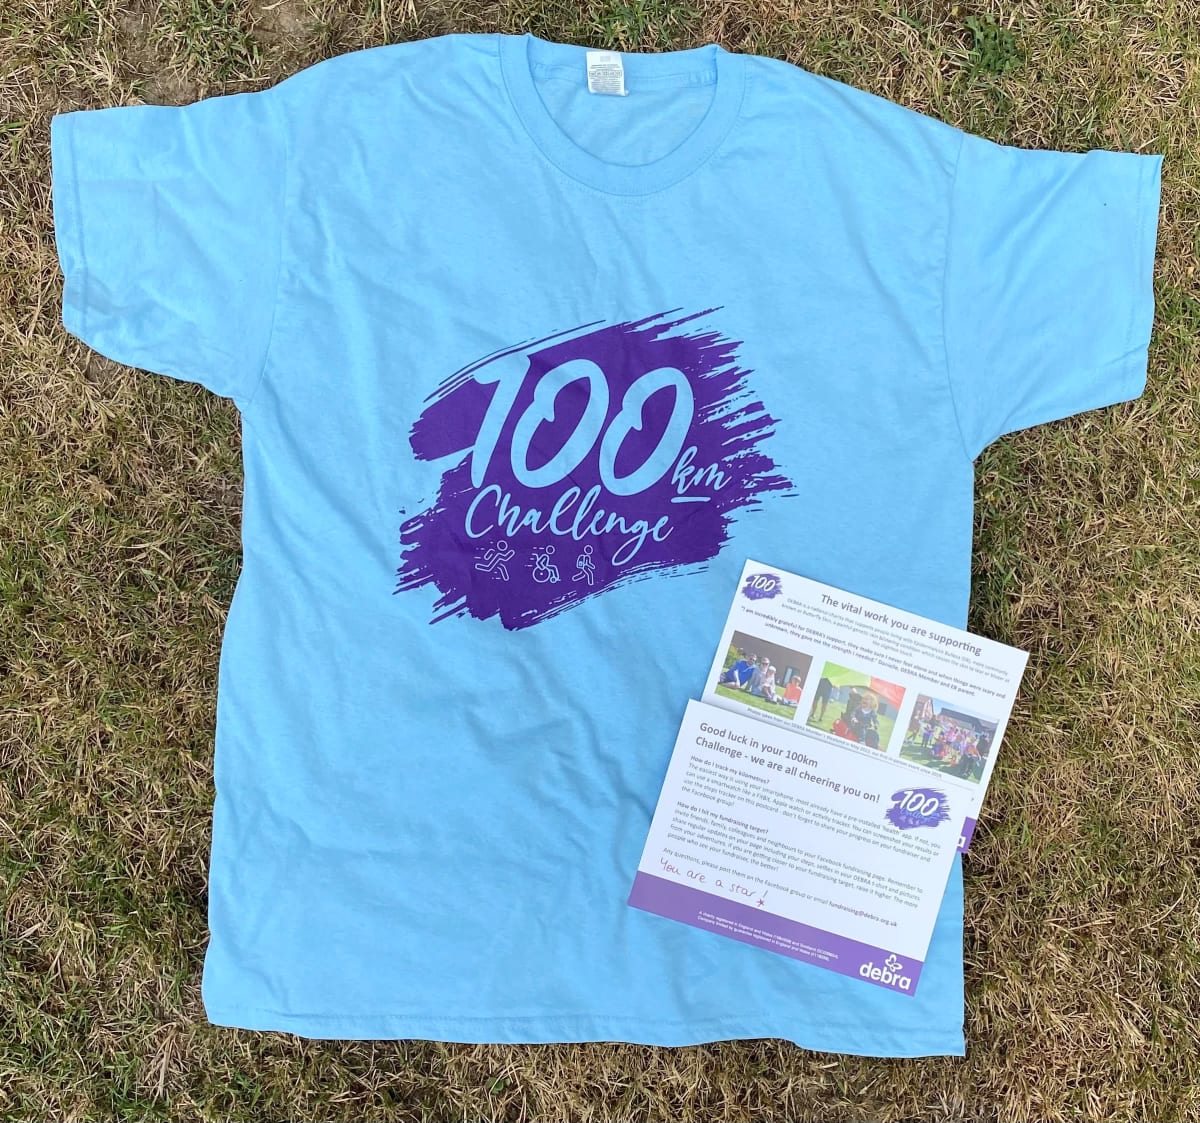 100km challenge starter oack with t shirt